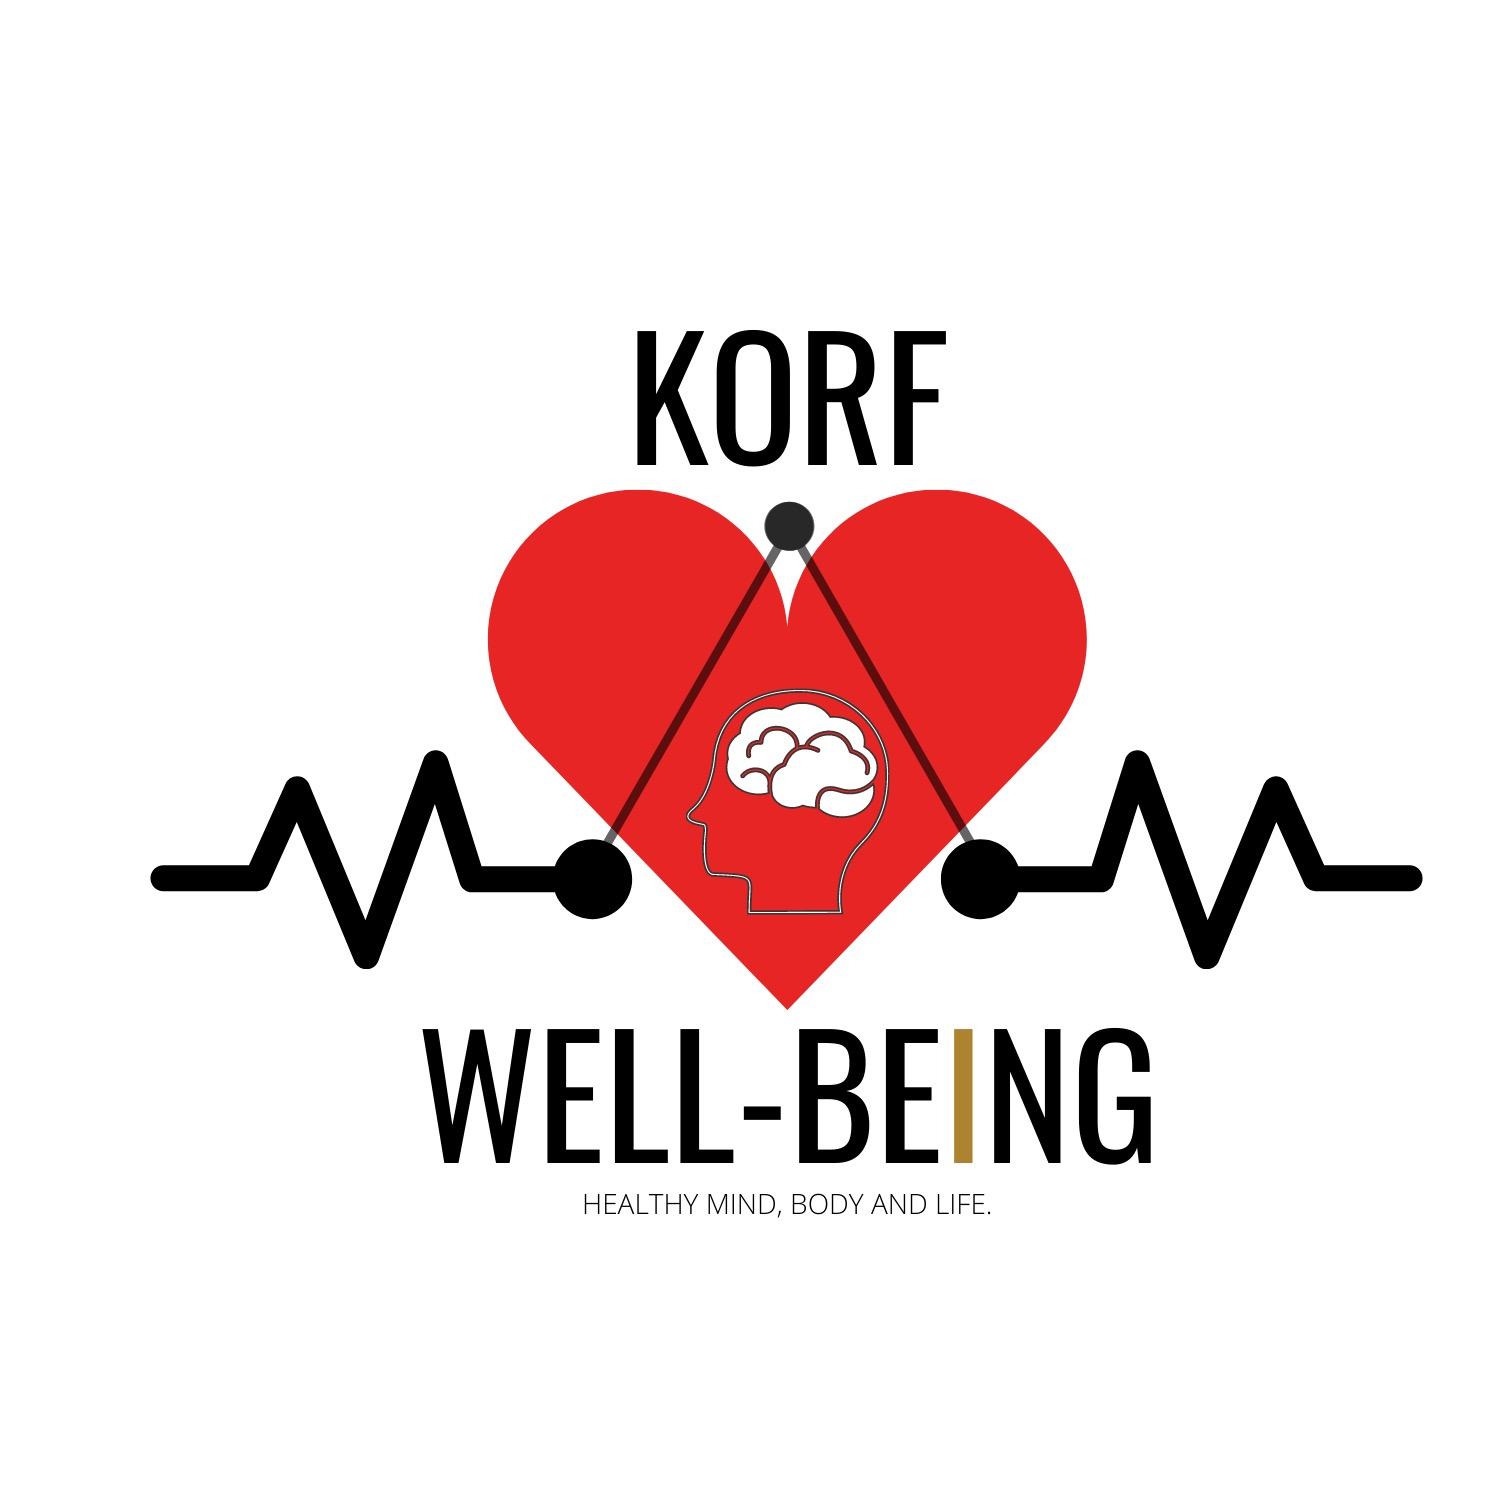 Korfcast: Healthy Mind, Body and Life